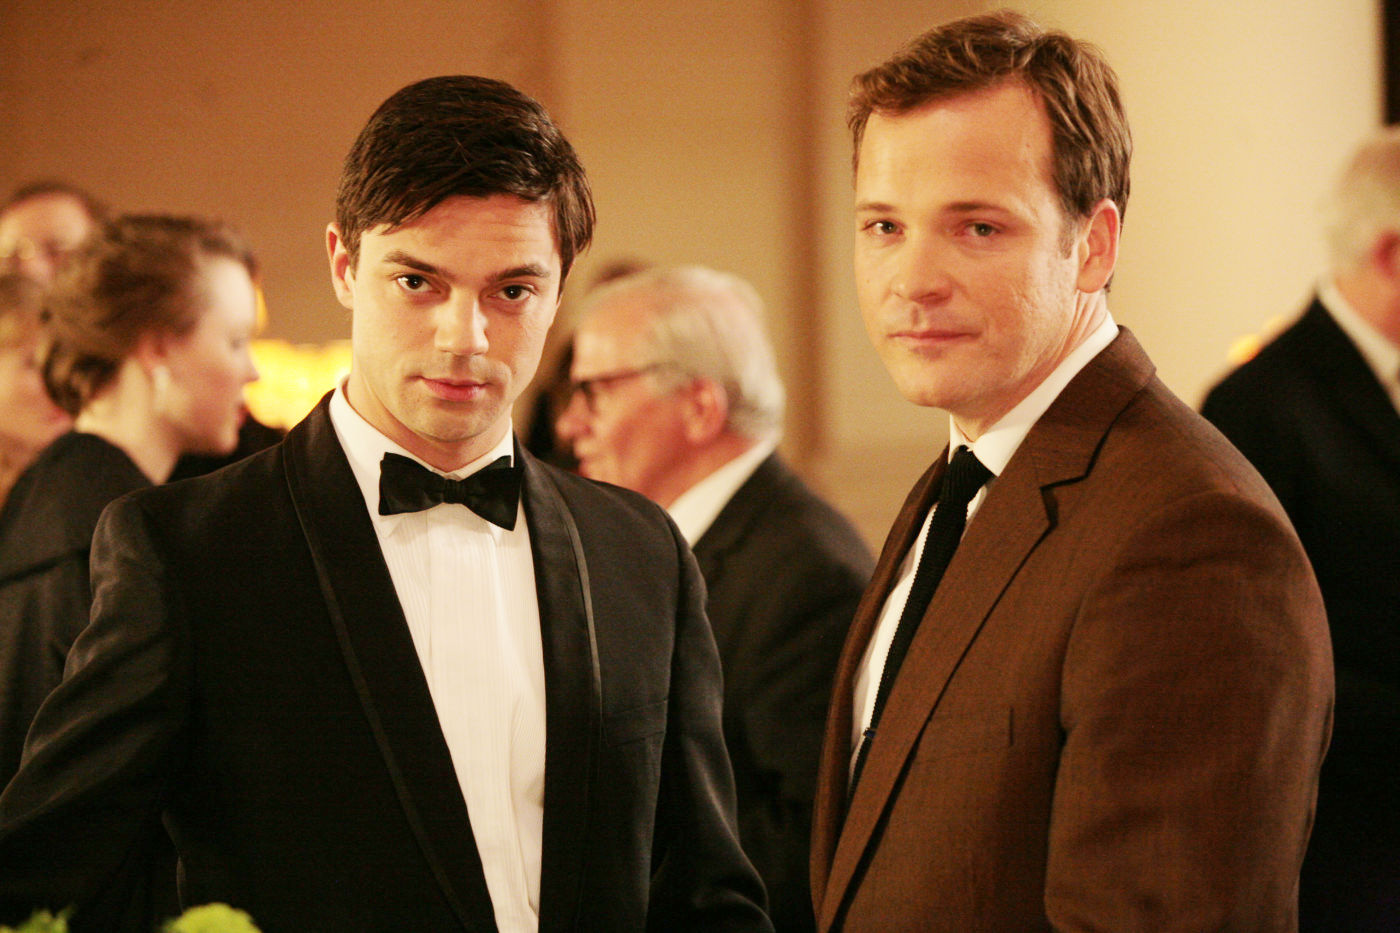 Dominic Cooper stars as Danny and Peter Sarsgaard stars as David in Sony Pictures Classics' An Education (2009). Photo credit by Kerry Brown.